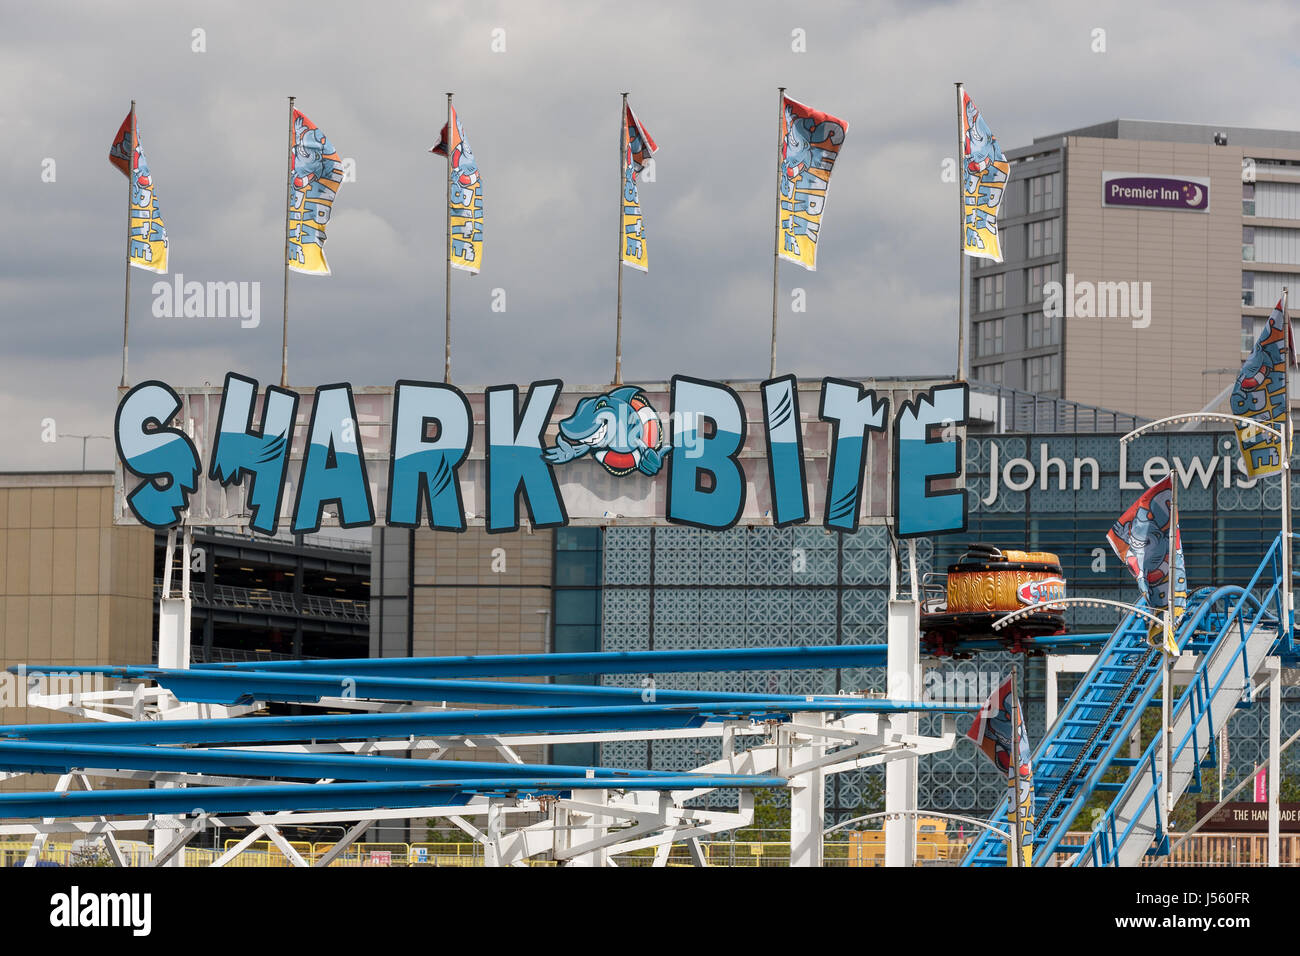 The shark bite funfair ride attraction at the Olympic park, Stratford, E20 on a bright summers day Stock Photo